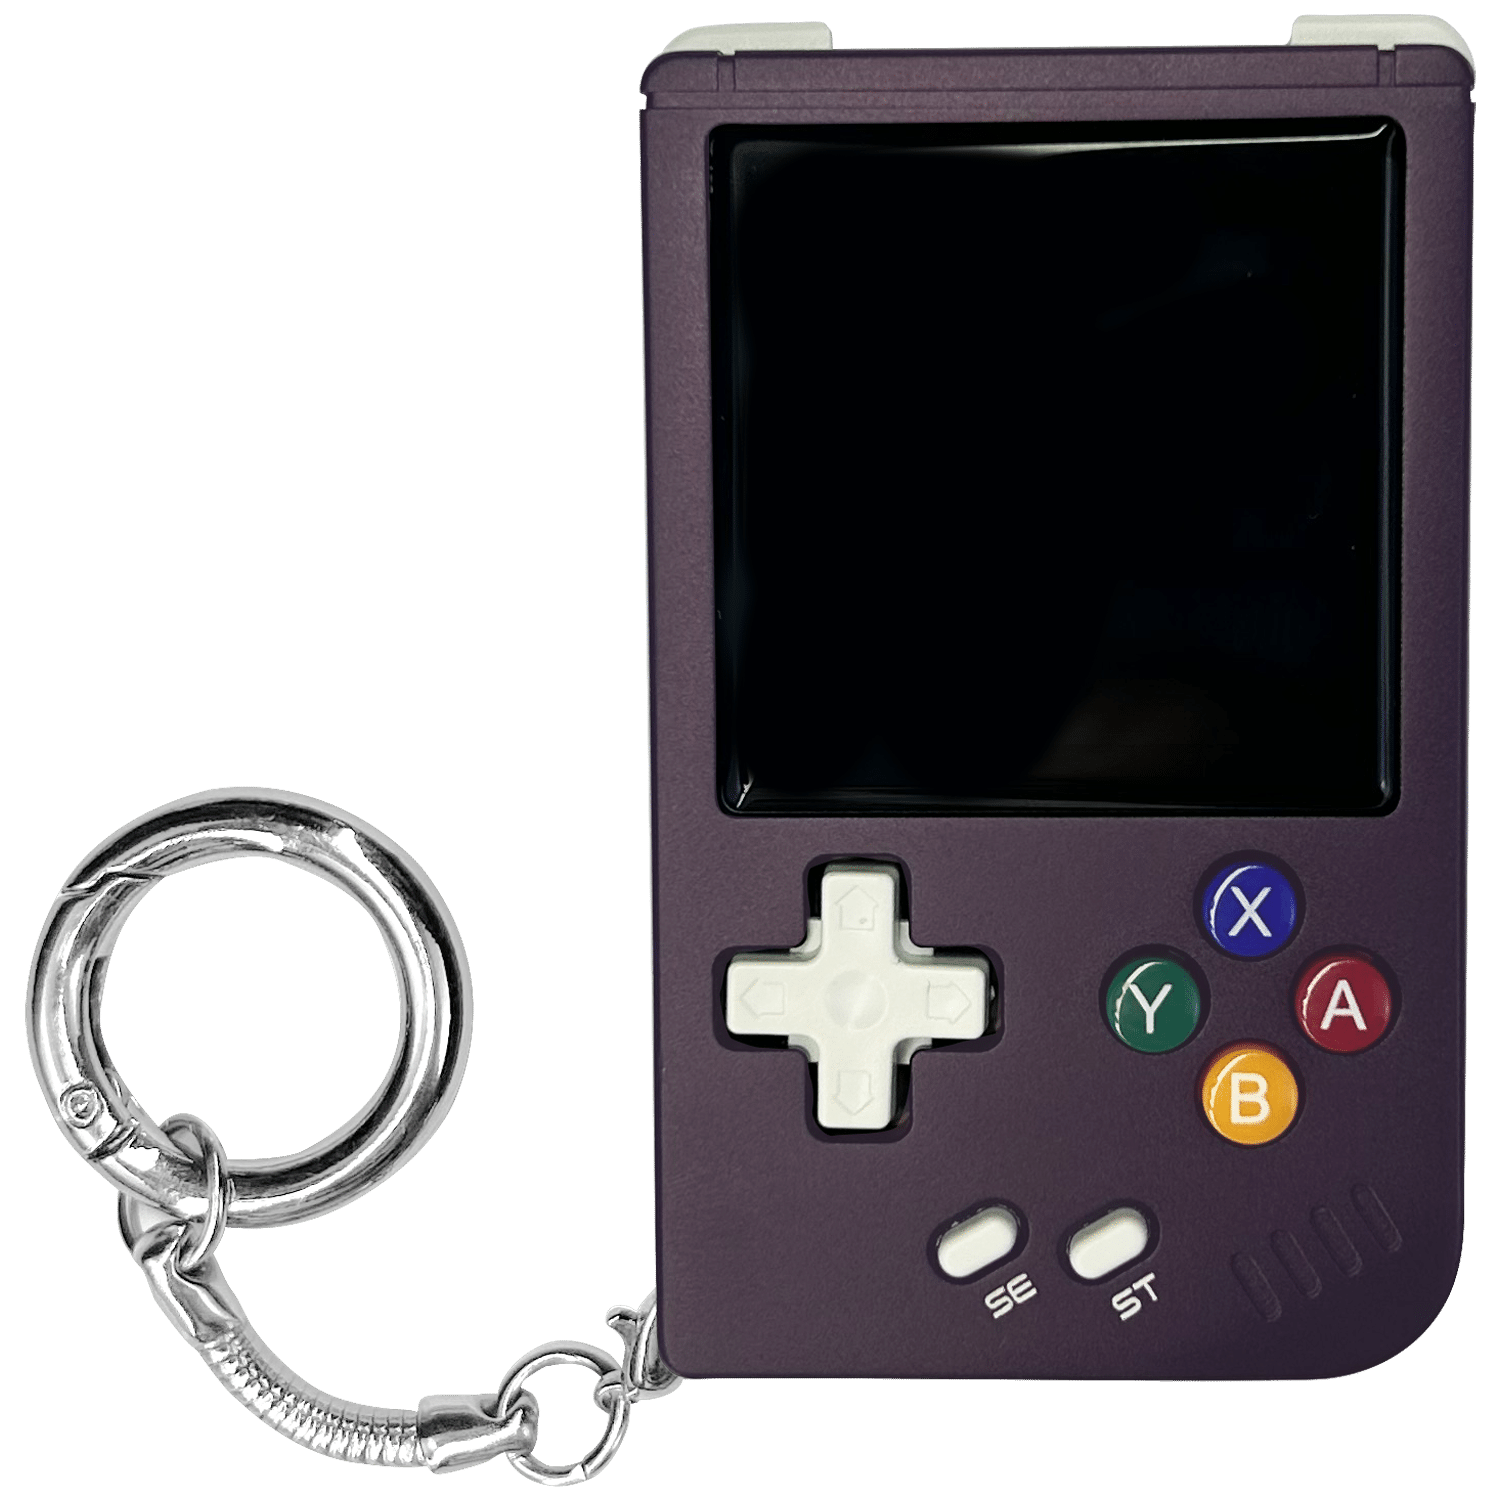 Gameboy Keychain - 24h delivery